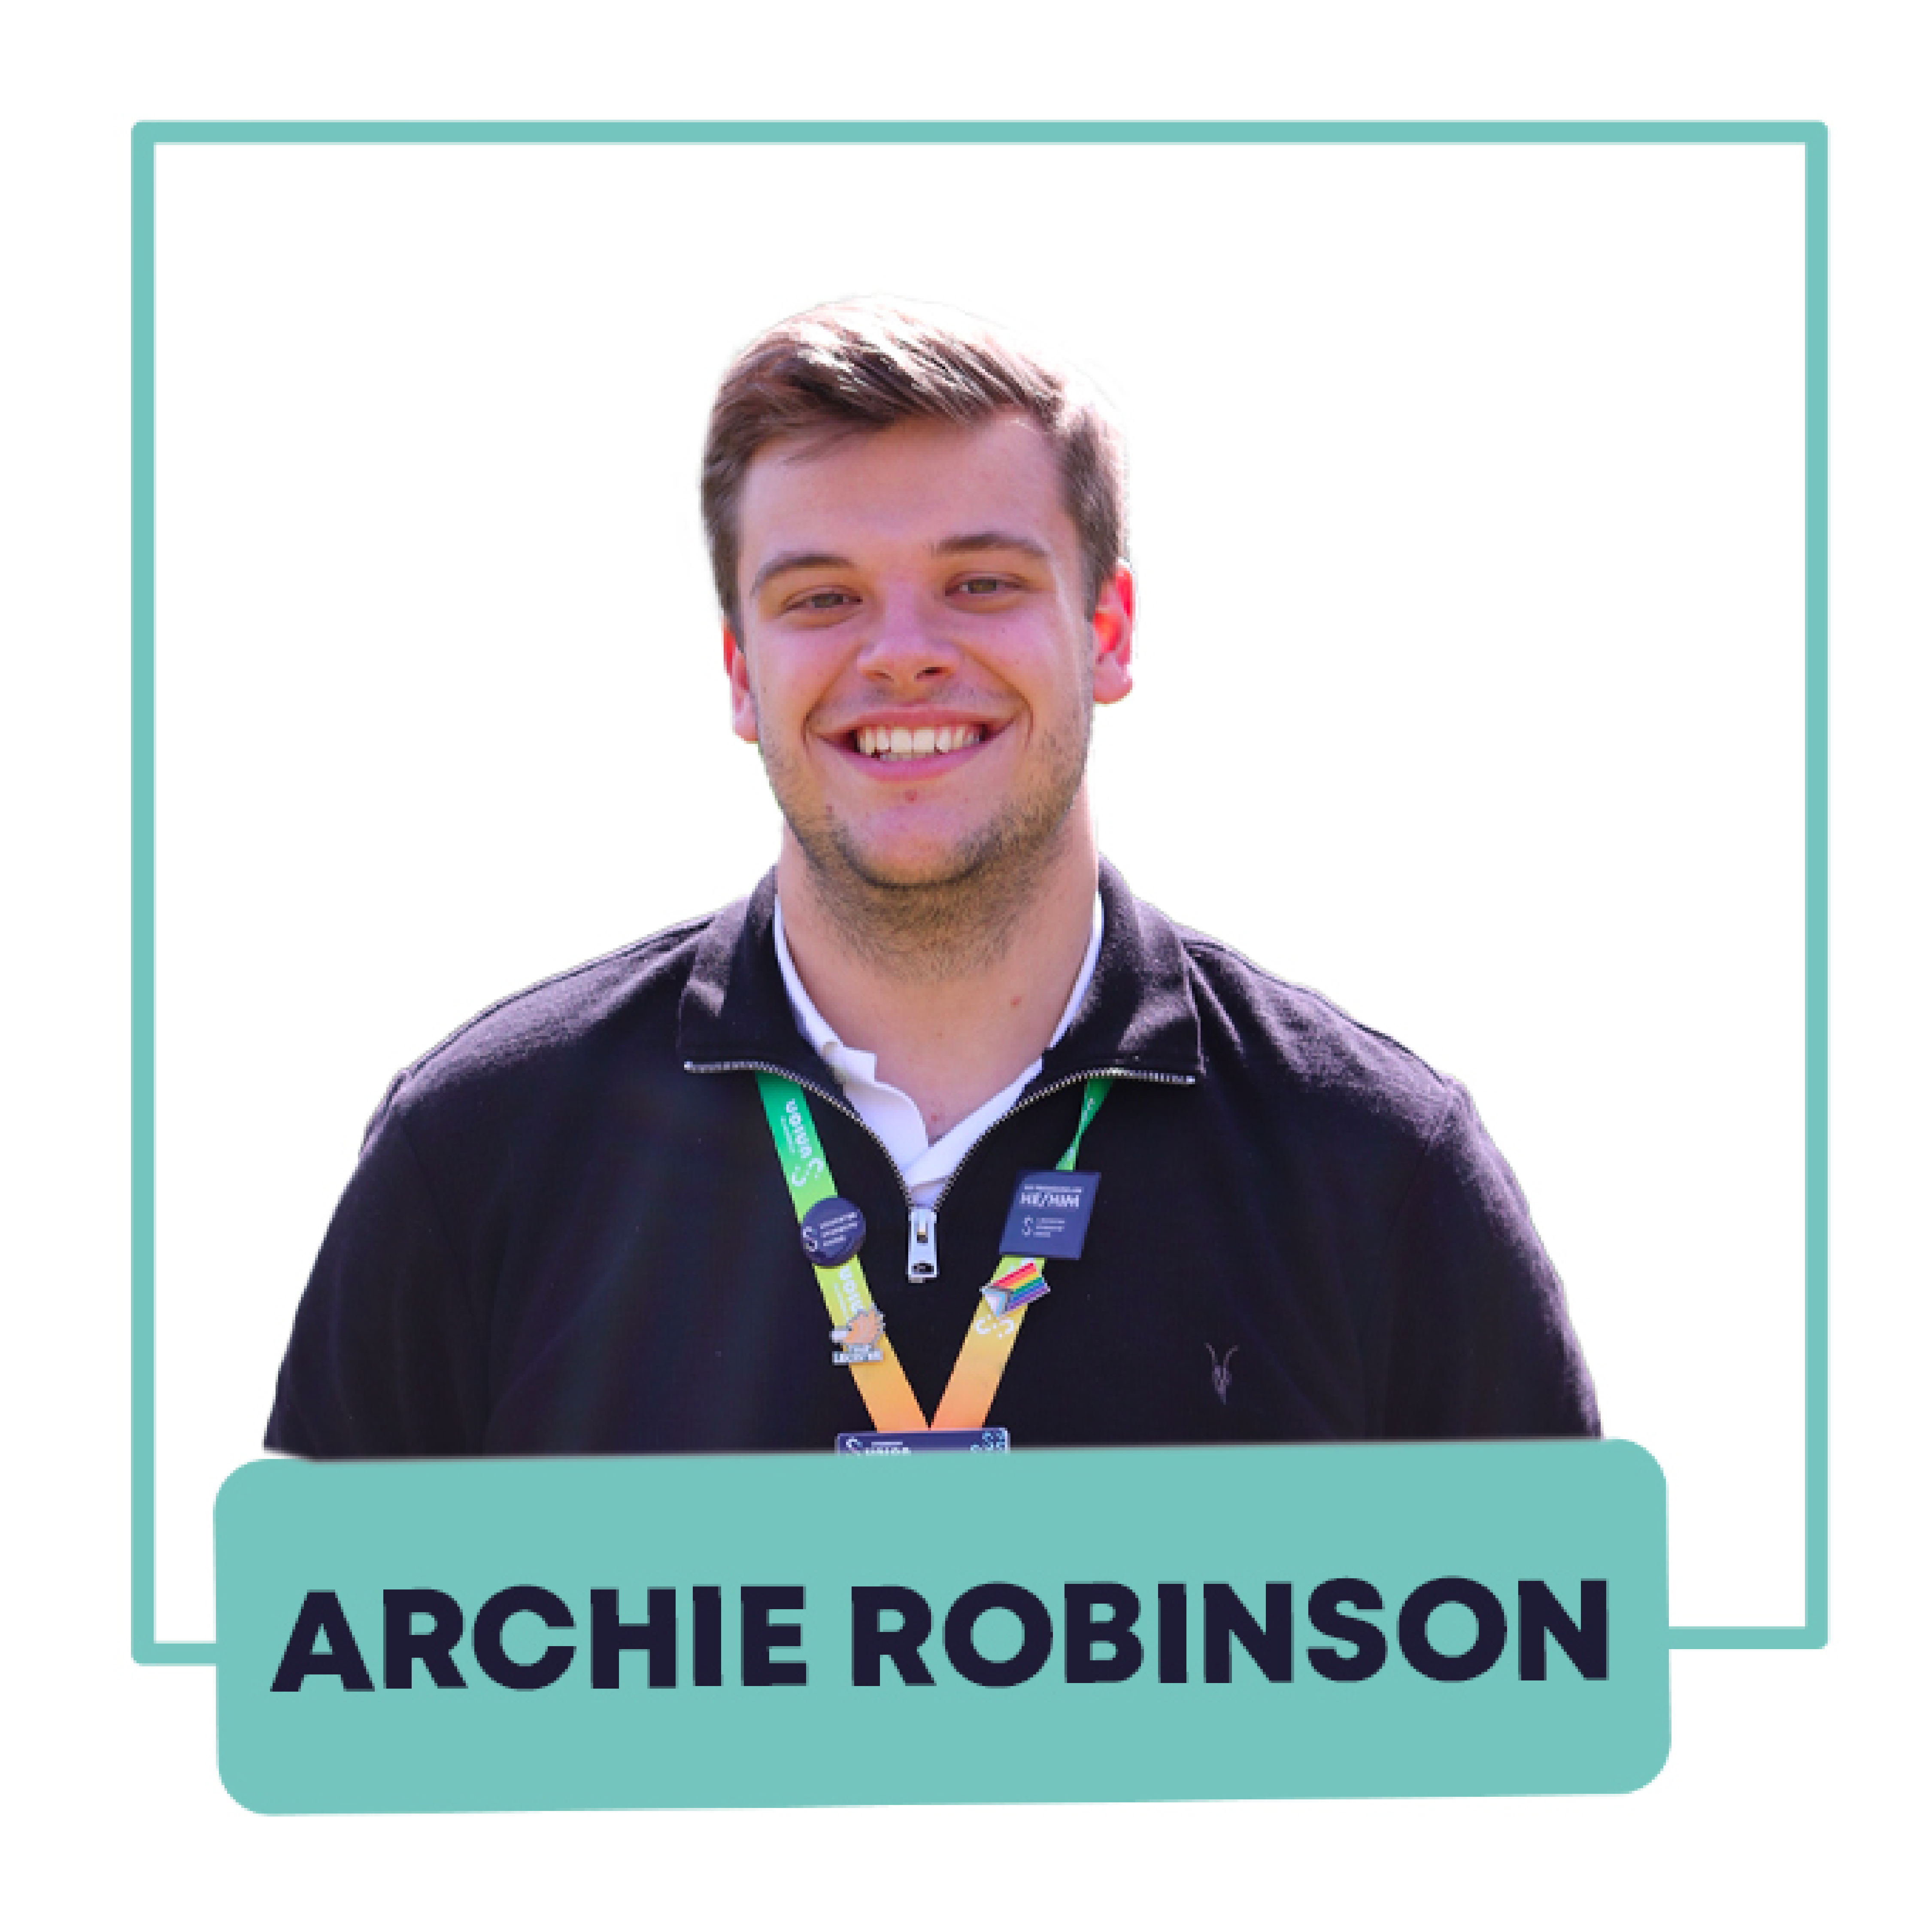 Archie Robinson, Sports Officer 2022/2023